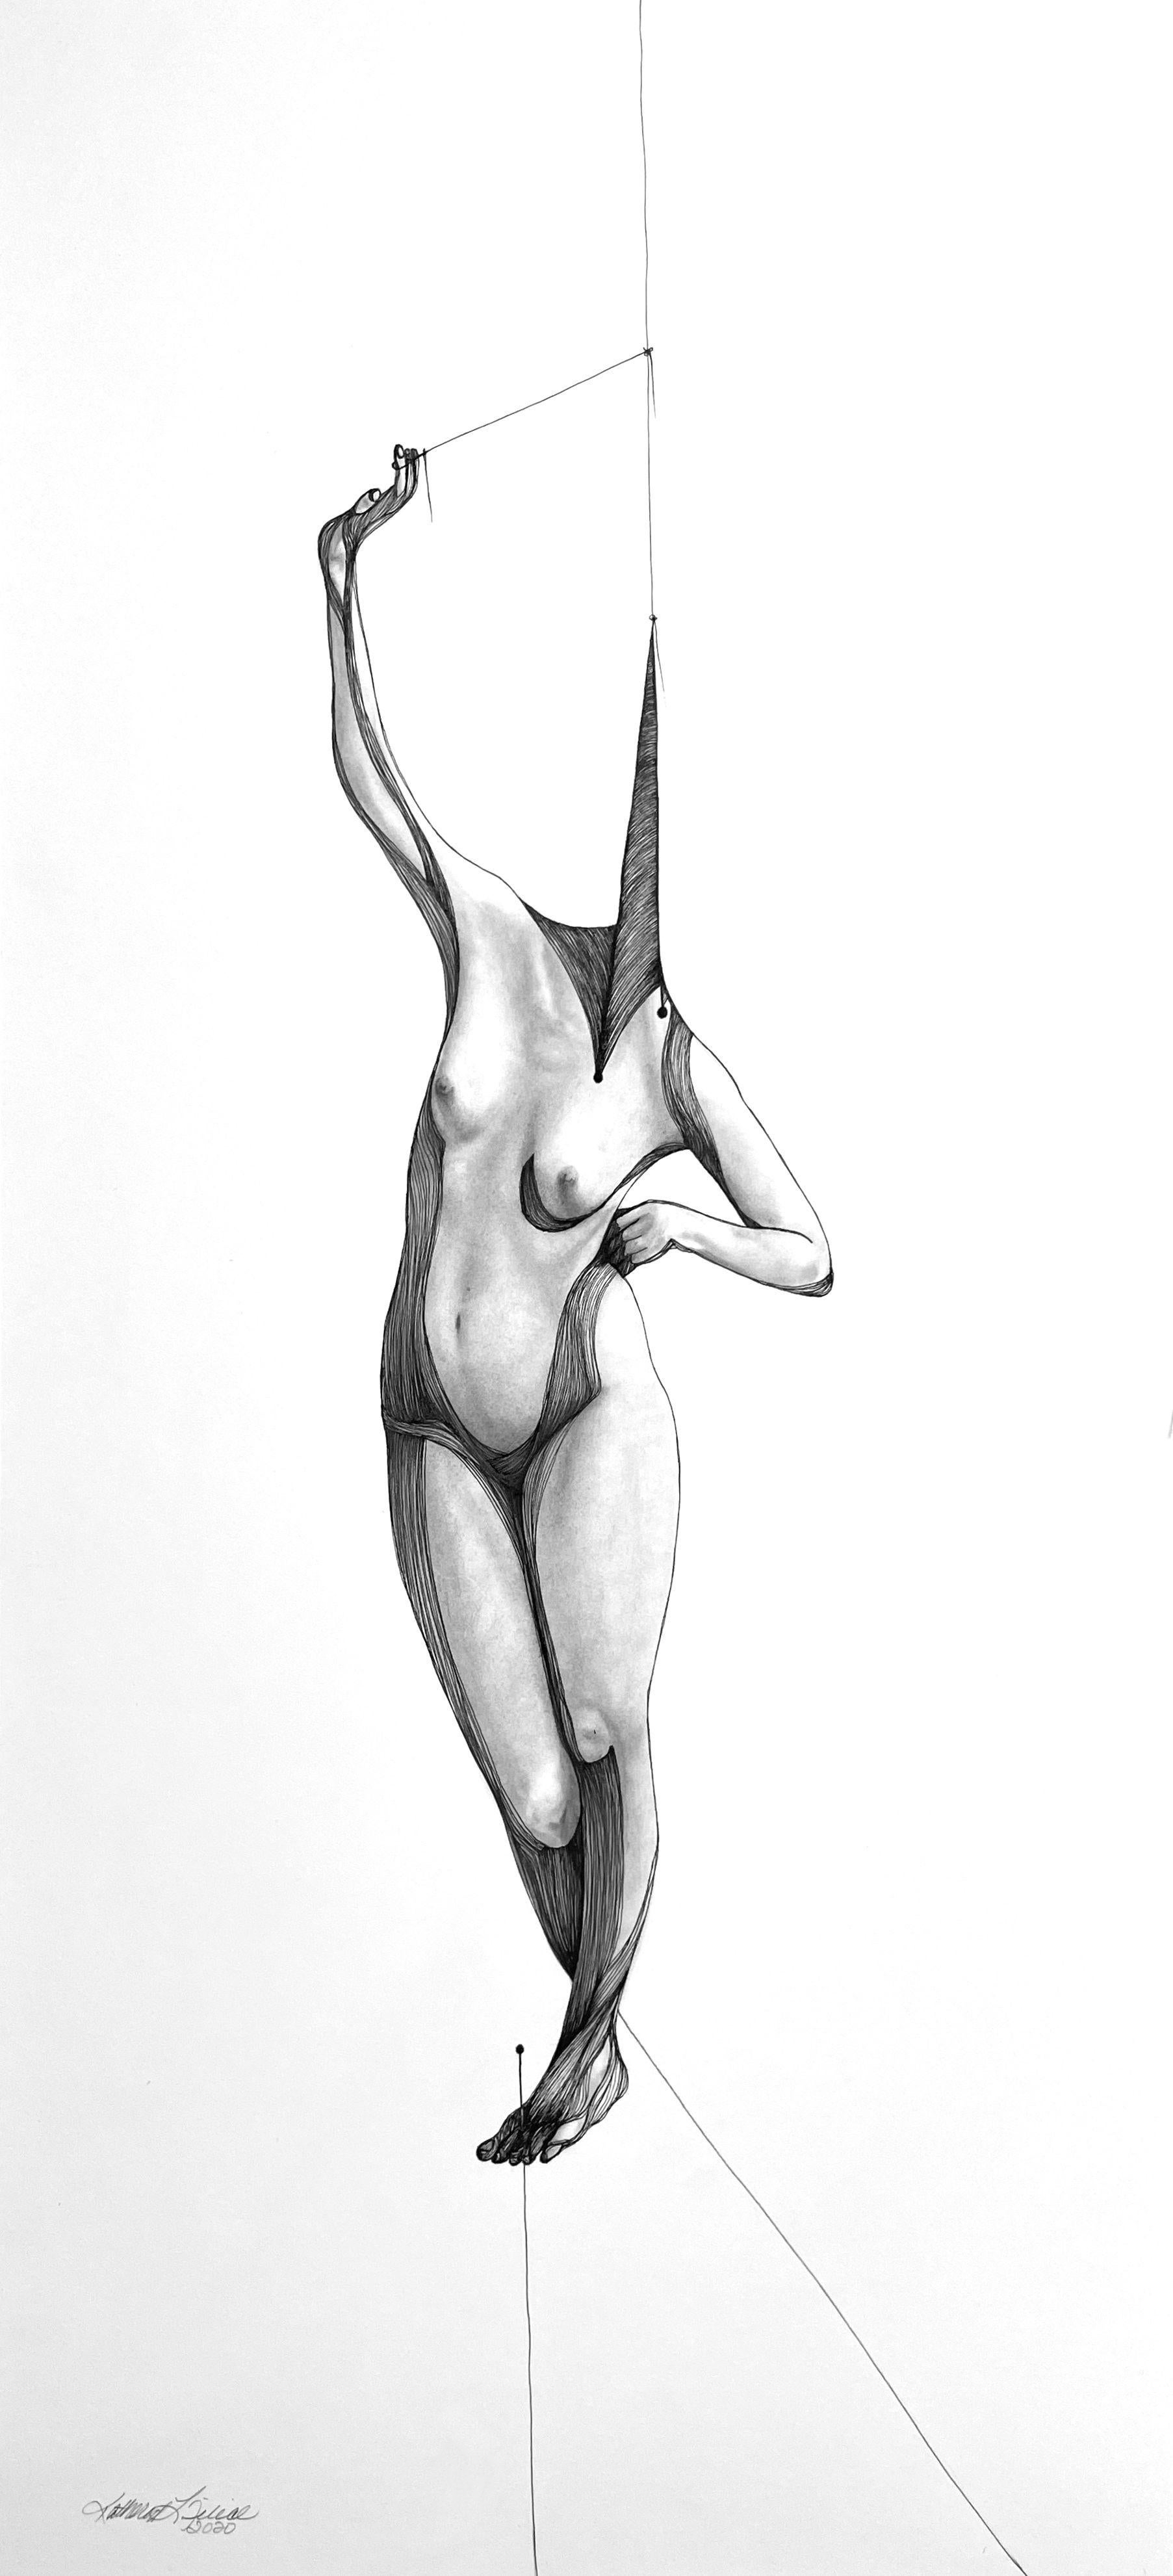 Katherine Filice Figurative Art - Alchemy II - Contemporary Abstract Figure Drawing in Pen + Ink + Graphite Black